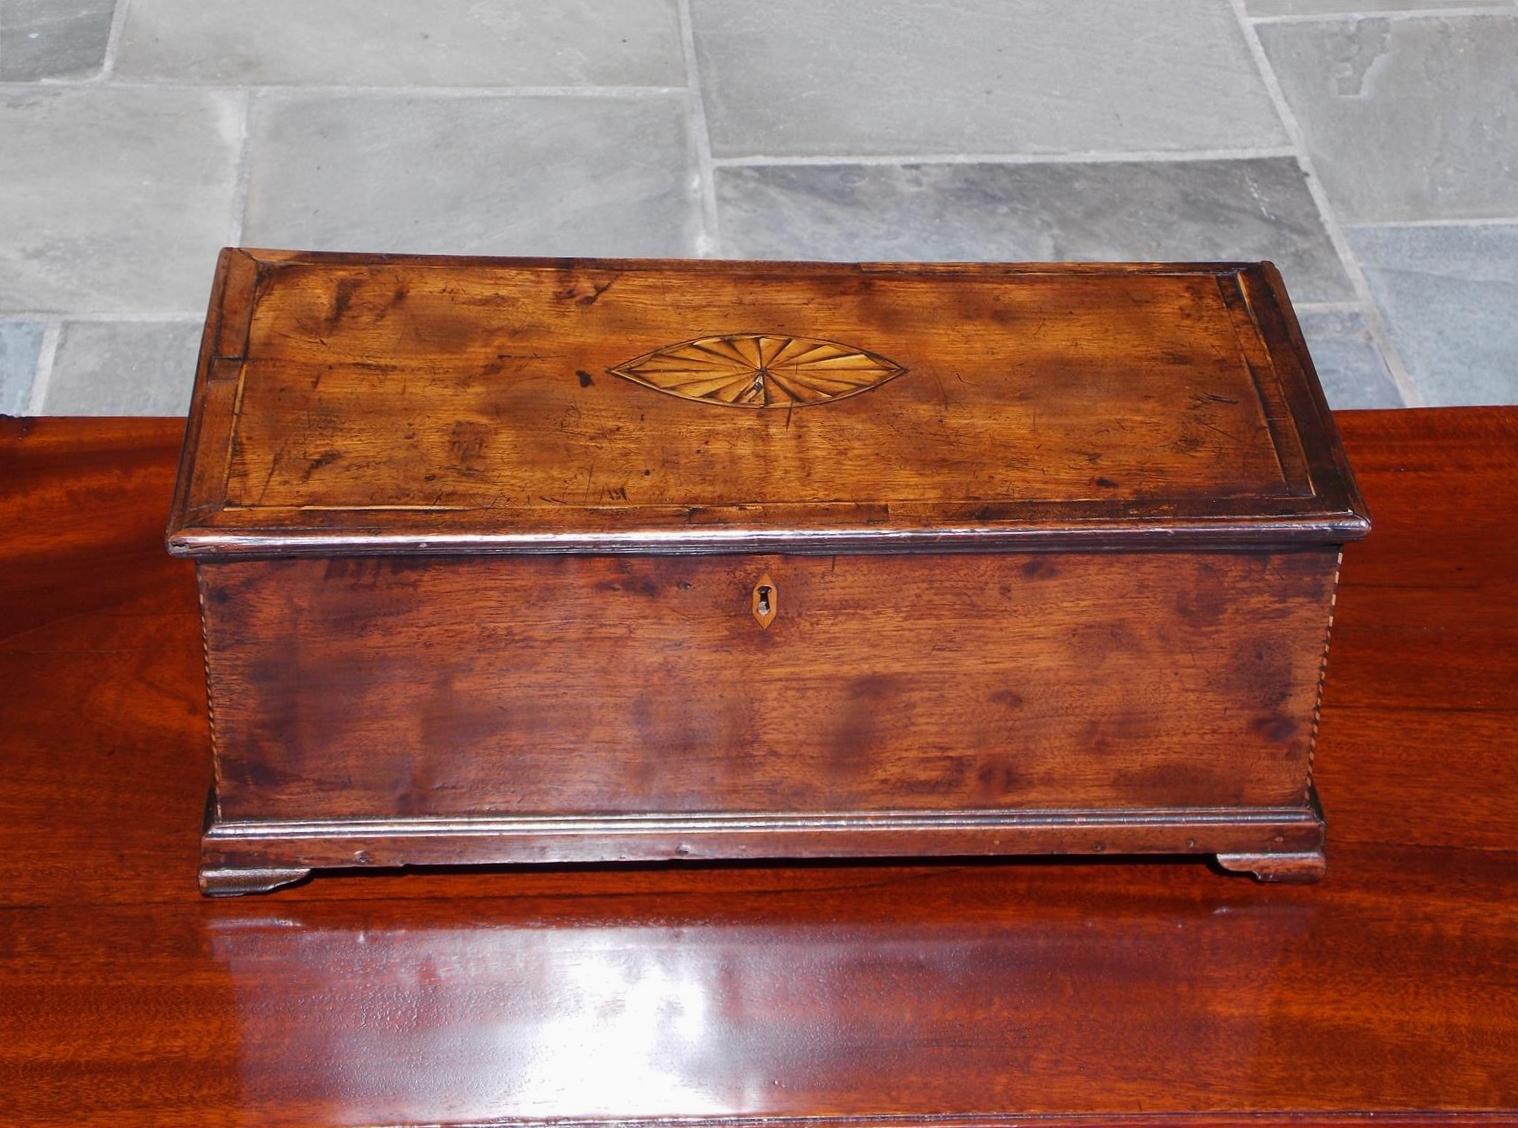 American Chippendale walnut oval satinwood inlaid valuables box with a carved molded hinged lid revealing an interior till with a secret hidden drawer, exterior checkered and sting inlays, centered diamond escutcheon, and resting on the original